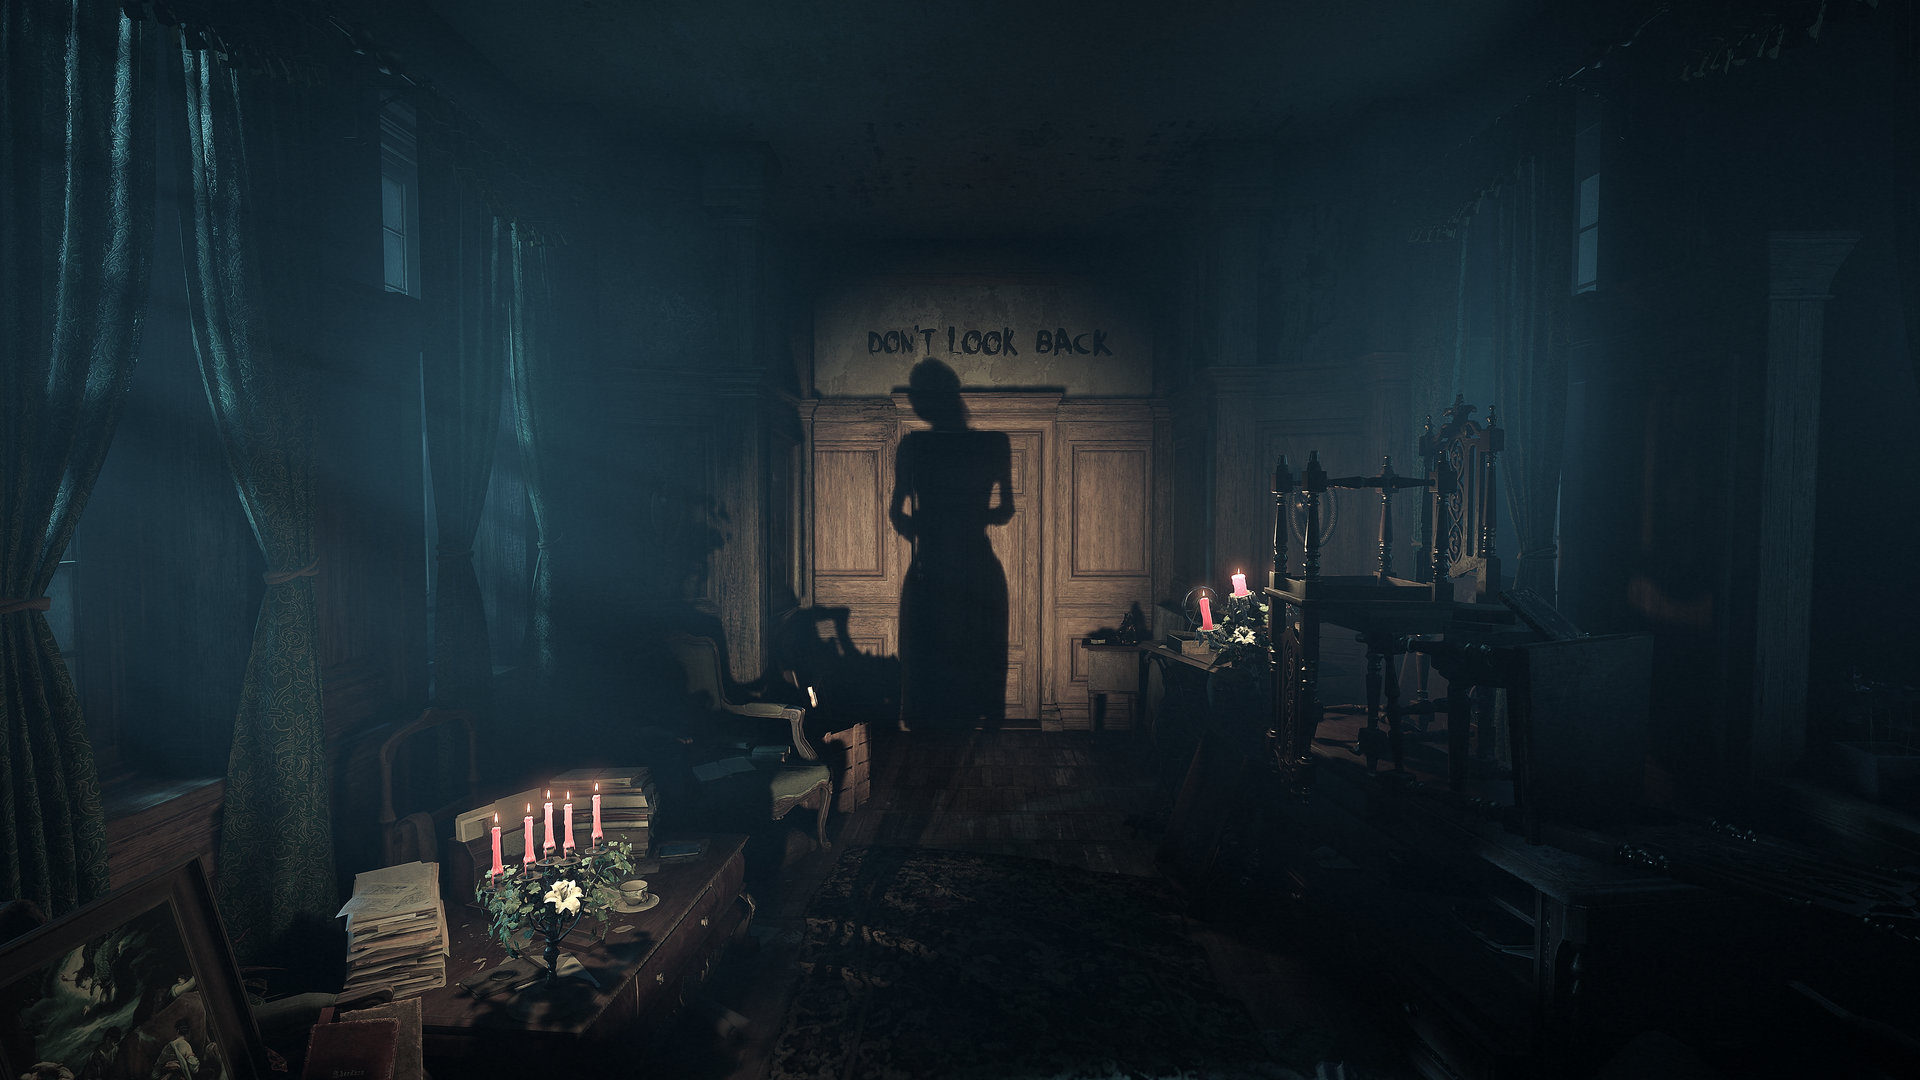 Layers of Fear: Legacy